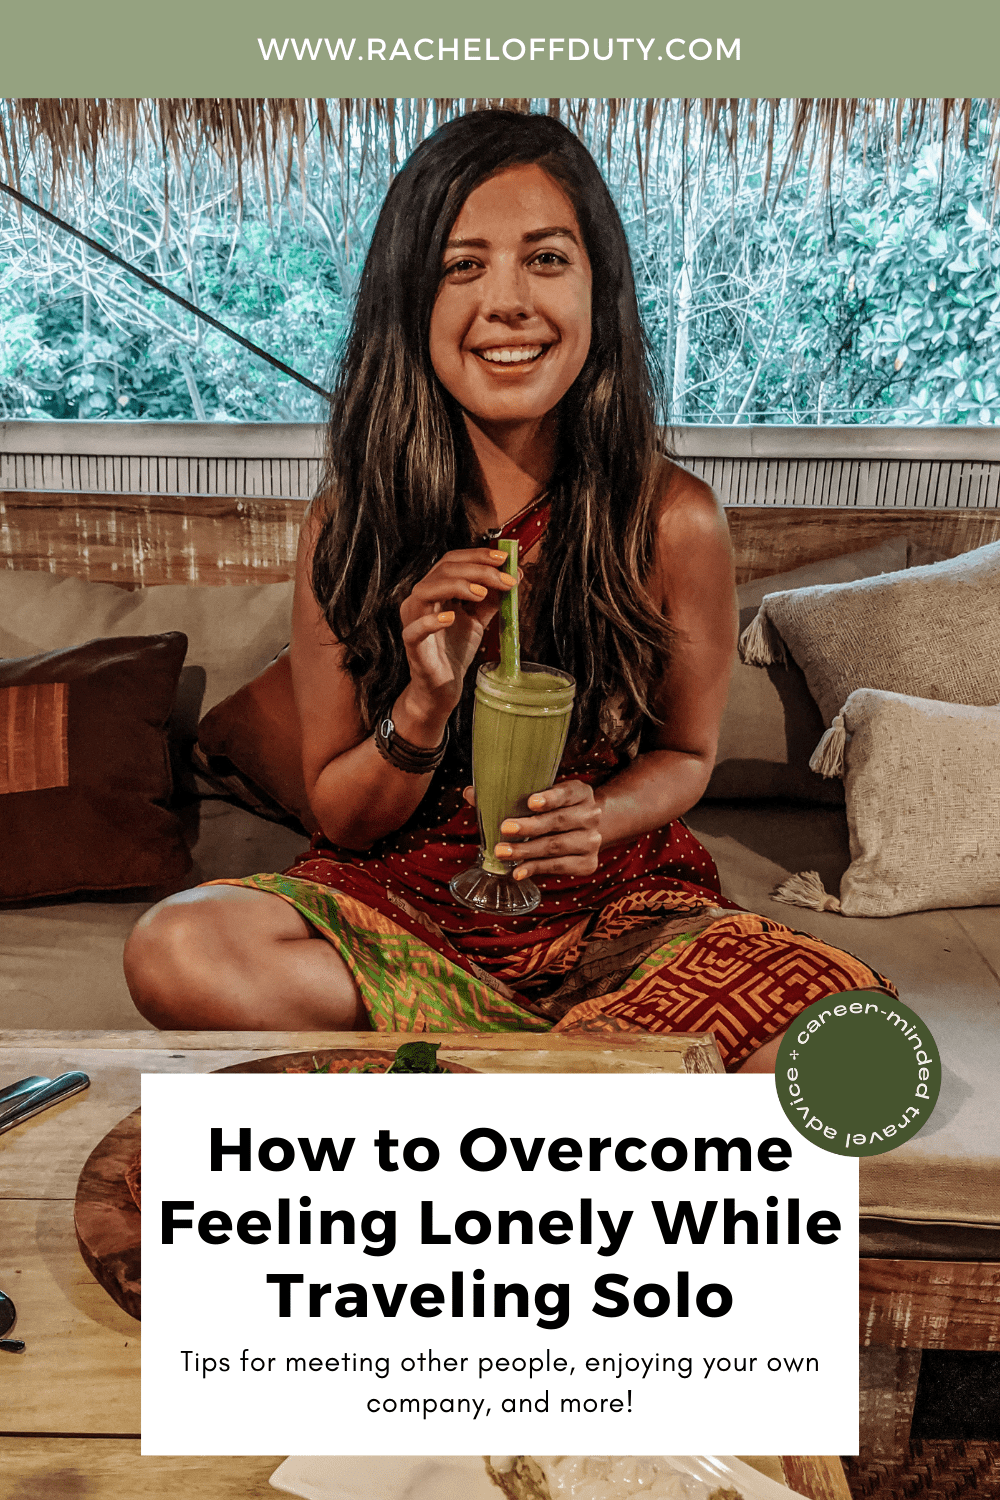 Rachel Off Duty: How to Overcome Feeling Lonely While Traveling Solo